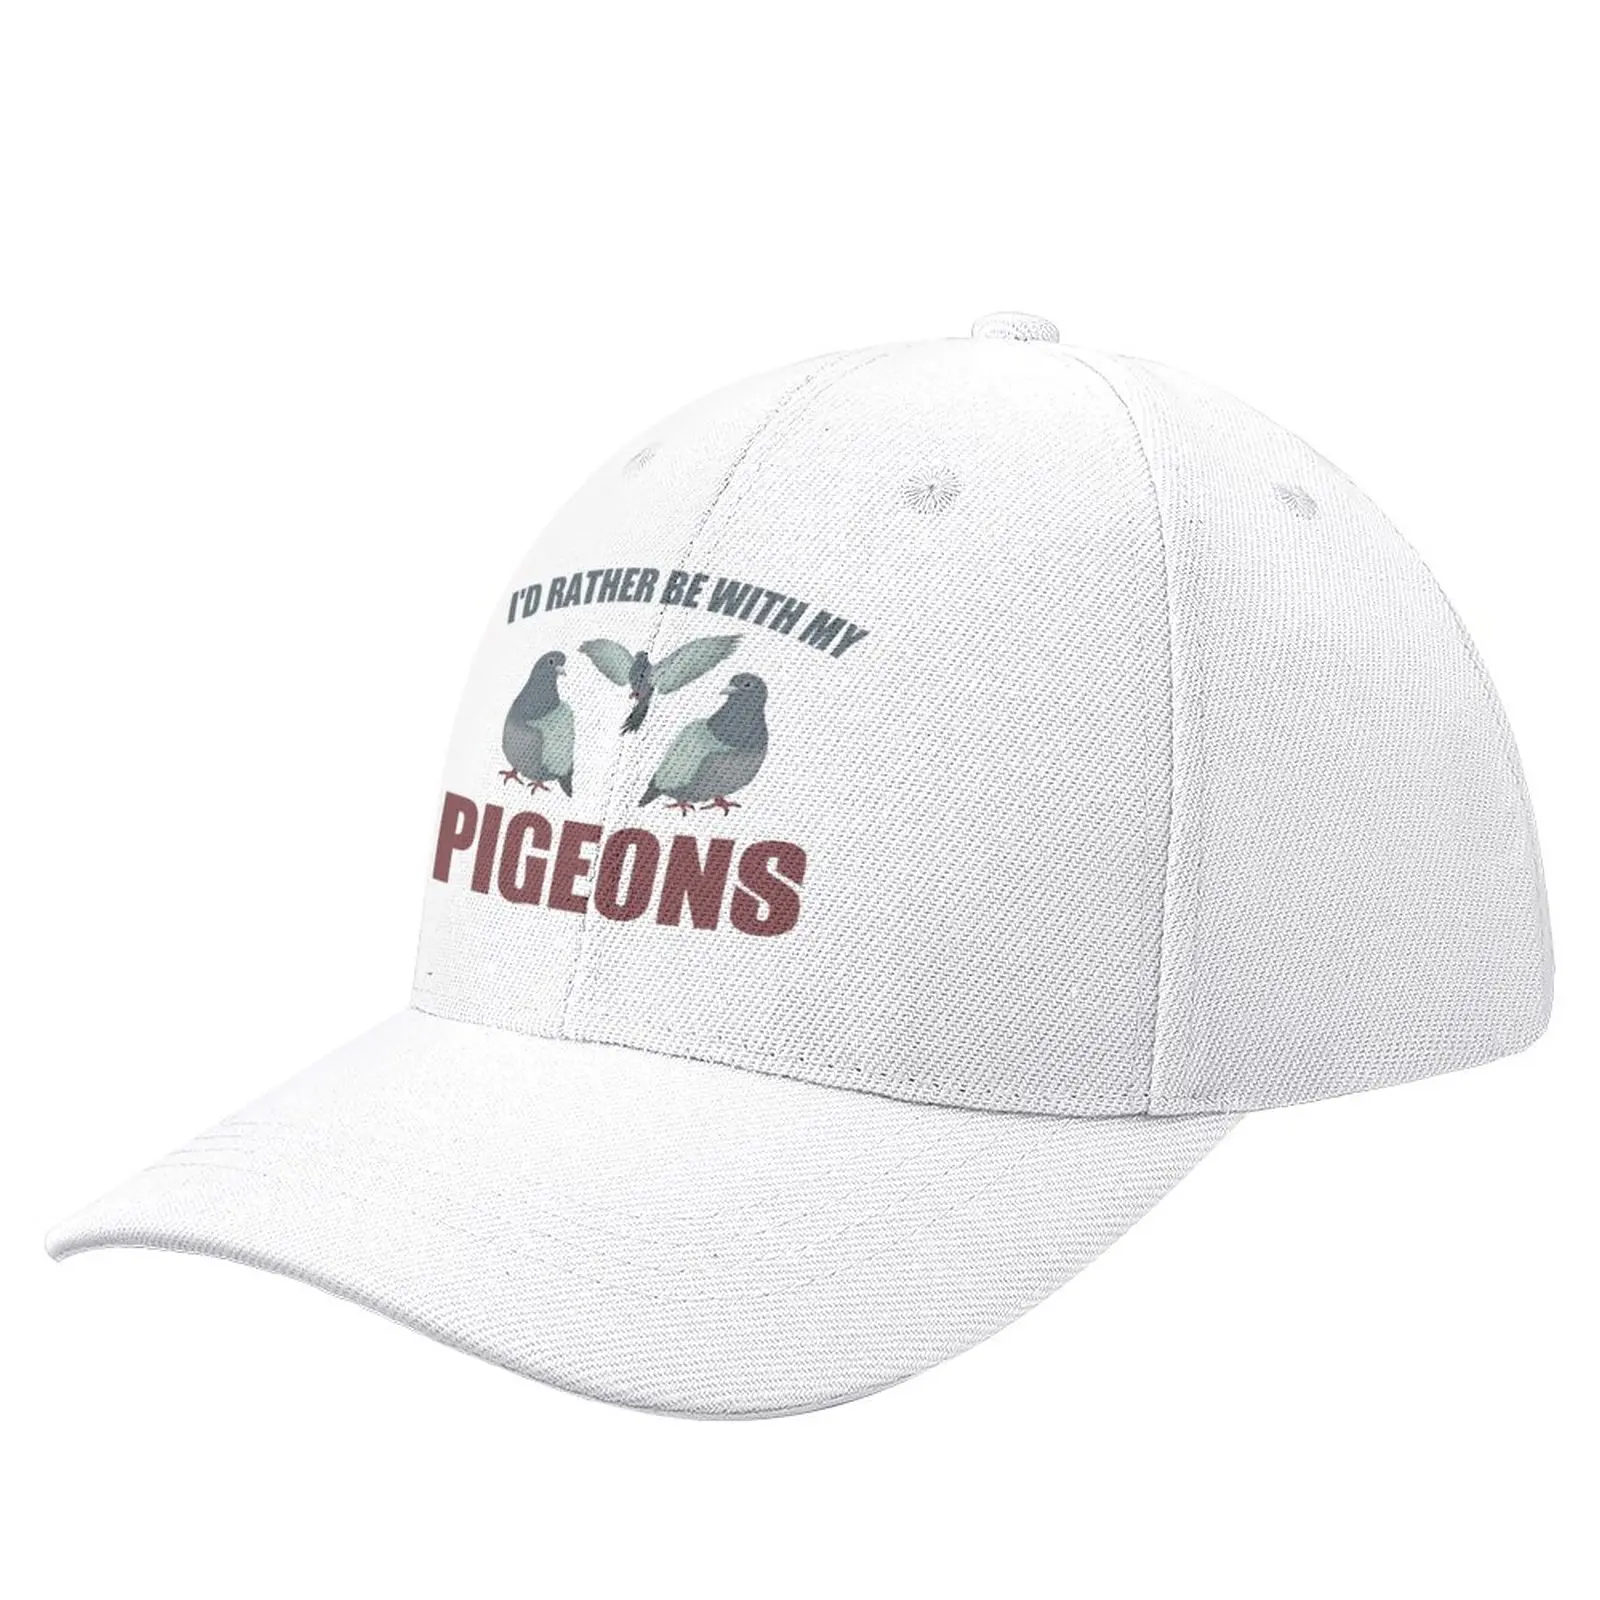 

I'd rather be with my pigeons - vintage design, for pigeon fanciers/lovers Baseball Cap party hats Beach Bag Hat For Girls Men'S